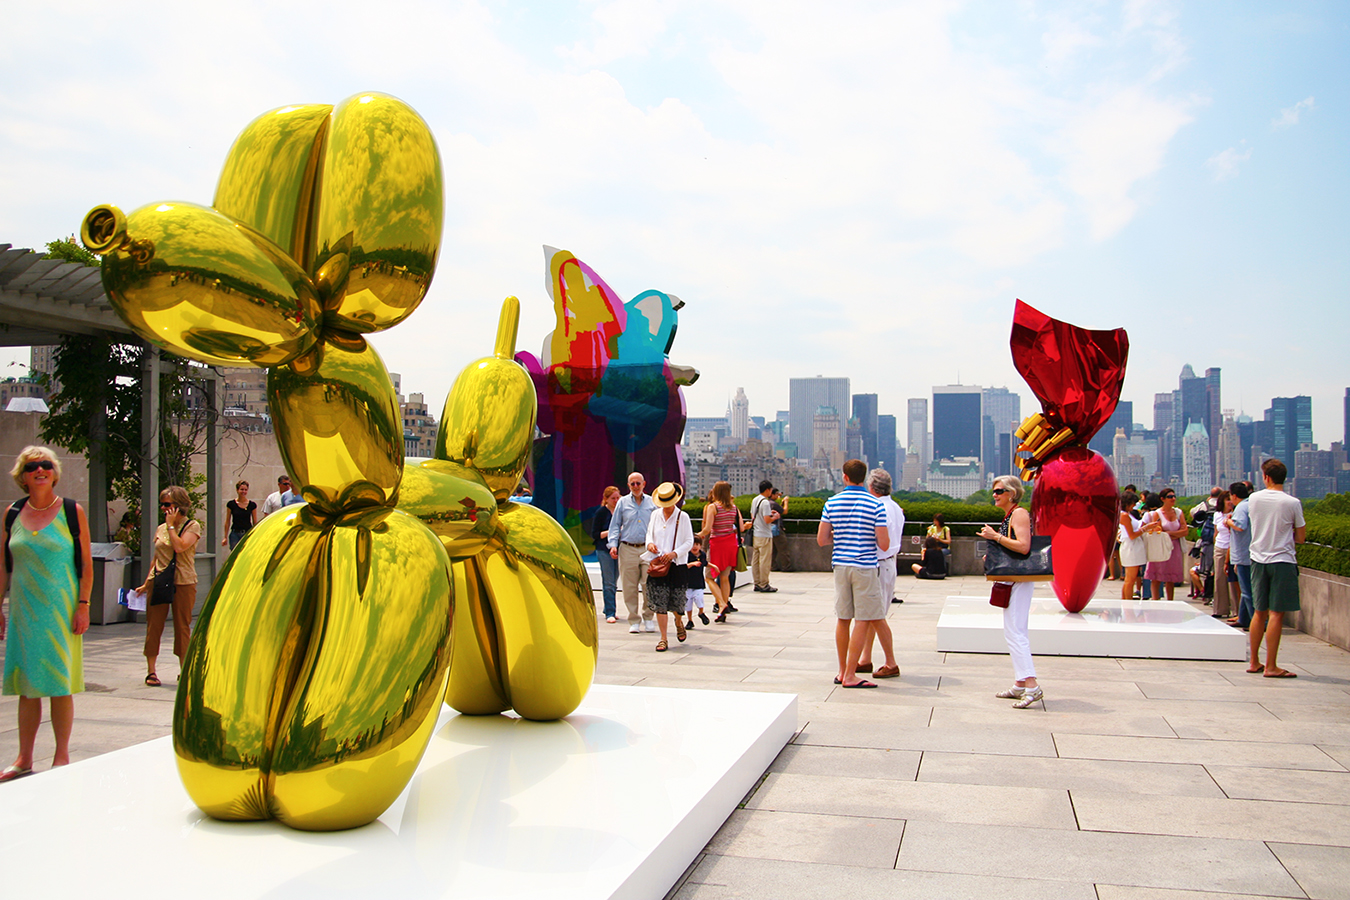 Who is Record Breaking Jeff Koons? — Danny With Love